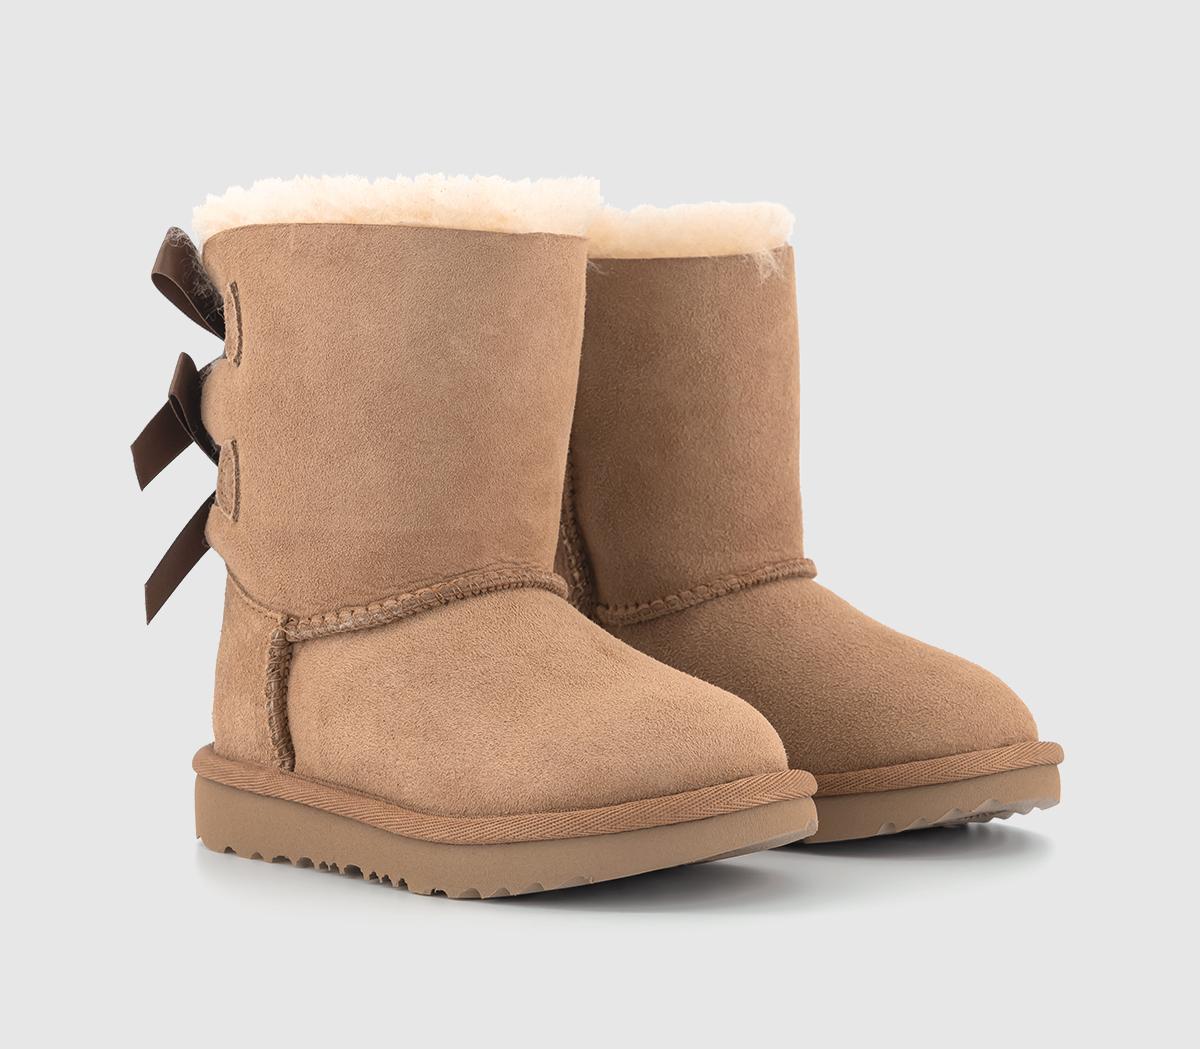 UGG Kids Toddler Bailey Bow Ii Boots Chestnut, 10 Youth